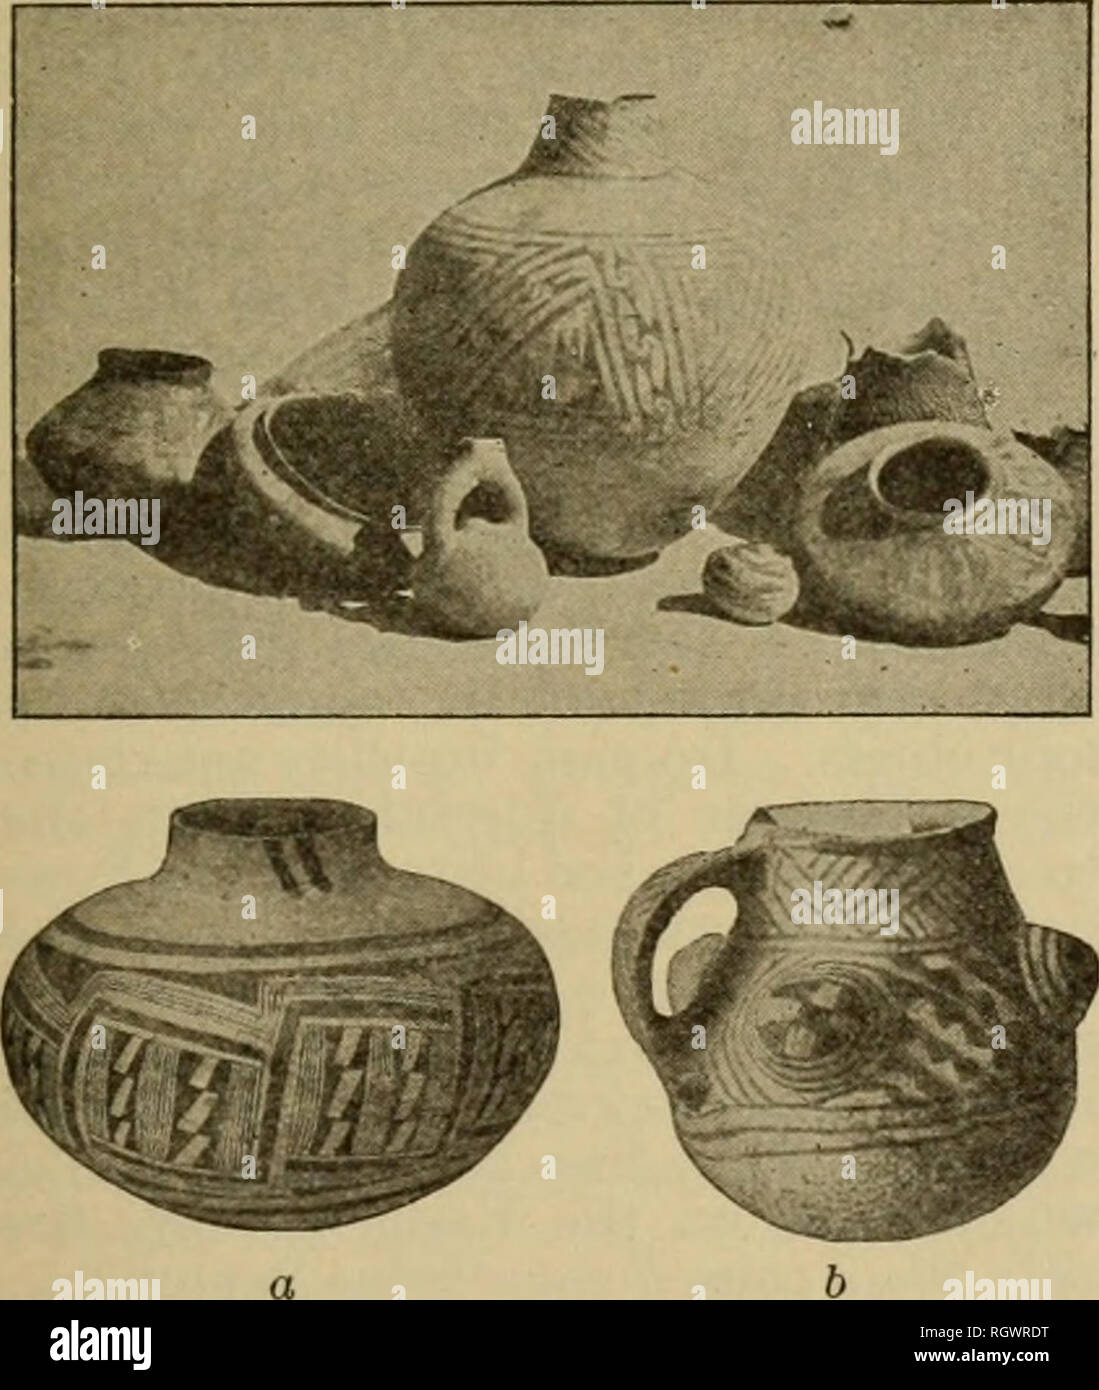 . Bulletin. Ethnology. MOUND VASES; HUMAN FORMS, ft, Arkansas; Height ef in. '*) Missouri; Height 9+ in. B. A. E., 1883, (2) in 3d Rep. B. A. E., 1884; M. C. Stevenson in 11th Rep. B. A. E., 1894; Stites, Economics of the Iro- quois, 1905; Thomas in 12th Rep. B. A. E., 1894; Thrnston, Antiq. Tenn., 1897;. ANCIENT PUEBLO WARE; DESIGNS IN BLACK ON WHITE GROUND a, Height 8 m. ; '', Height 6 in. Will and Spinden in Peabody Mus. Pa- pers, III, no. 4, 1906; Willoughby (1) in Jour. Am. Folk-lore, x, no. 36,1897, (2) in Putman Mem. Vol., 1909; Wyman in Mem. Peabody Acad. Sci., i, no. 4, 1875. (W. H. H Stock Photo